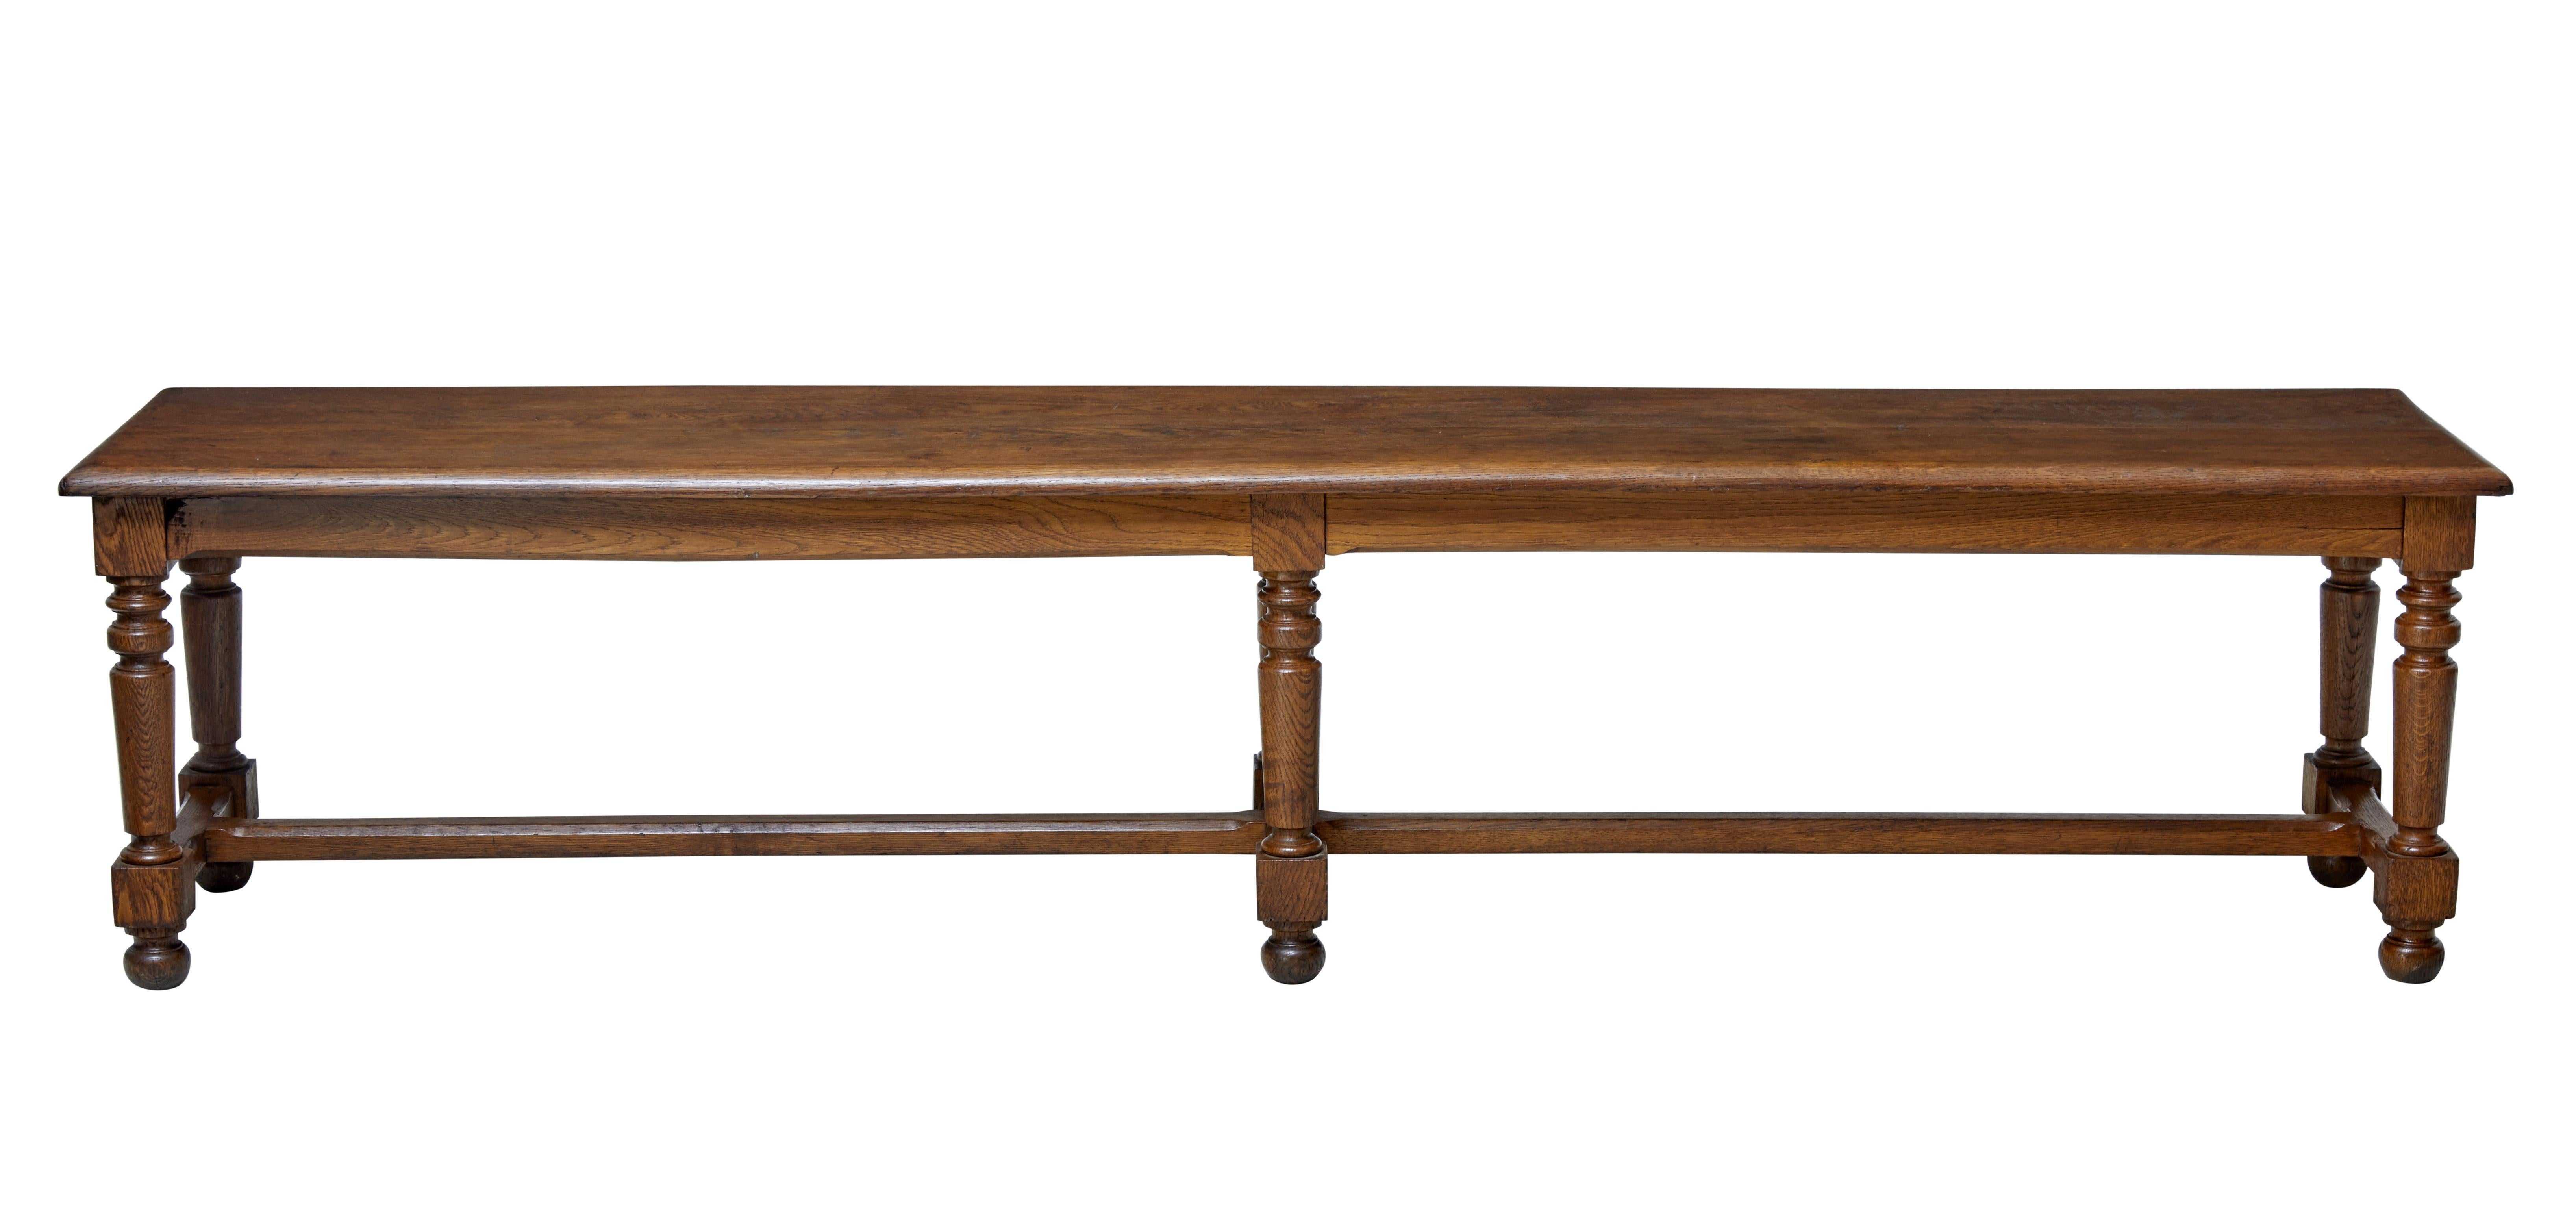 Large late 19th century bench made in oak, circa 1890.

Ideal for use in a hallway or cloak room. At near 2 meters long this bench can provide seating for a comfortable 4 - 5.

Standing on six turned legs united by stretcher. Single piece